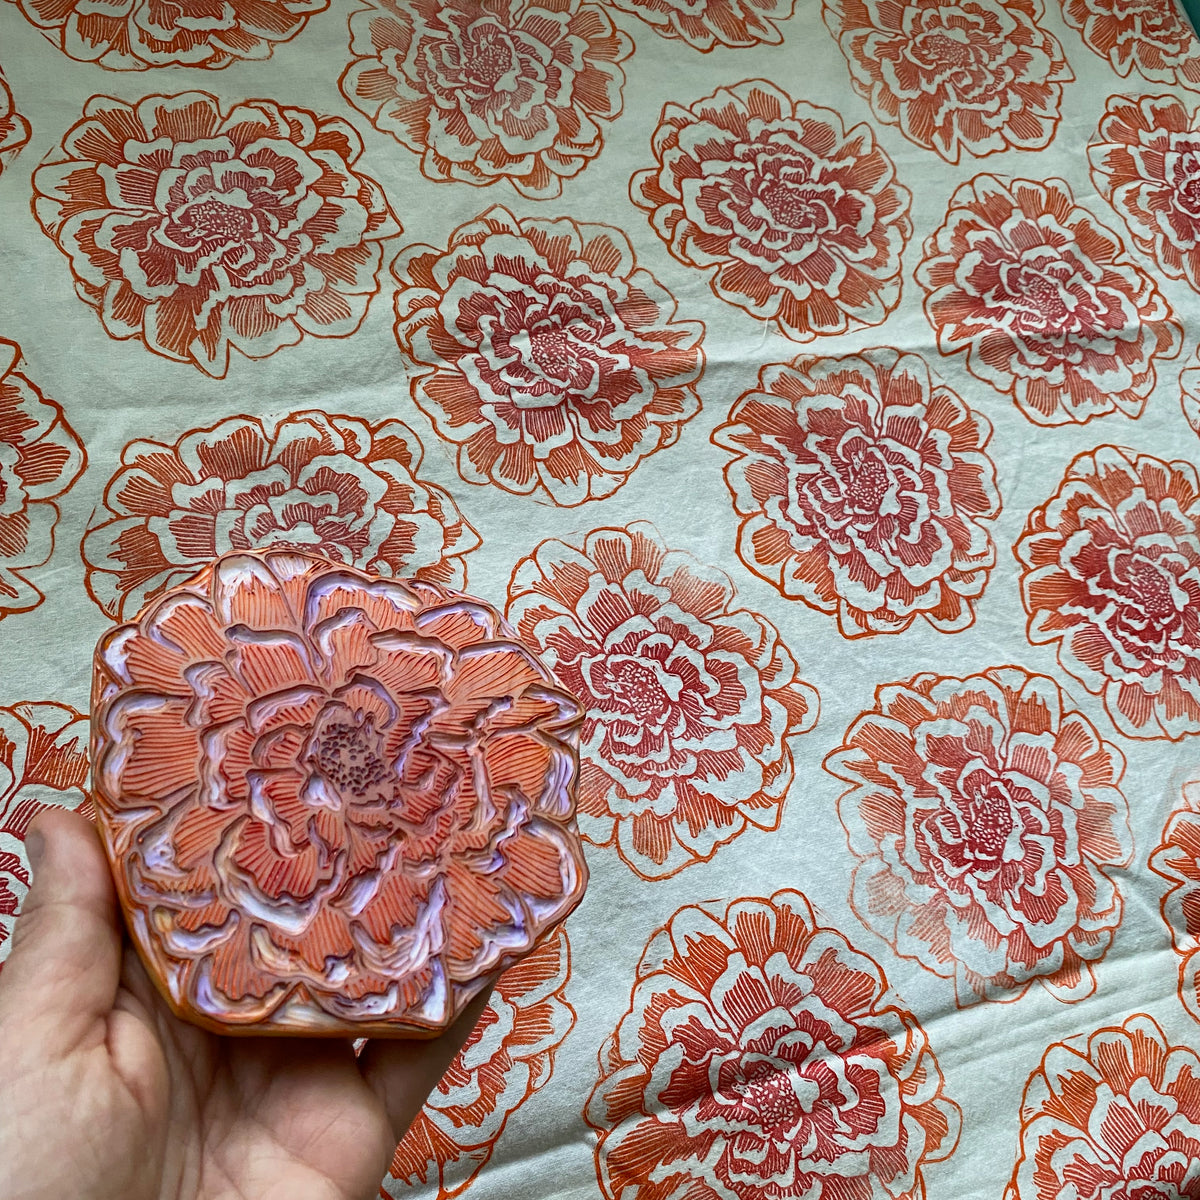 Block Print Your Own Fabric! 3 Hour Workshop